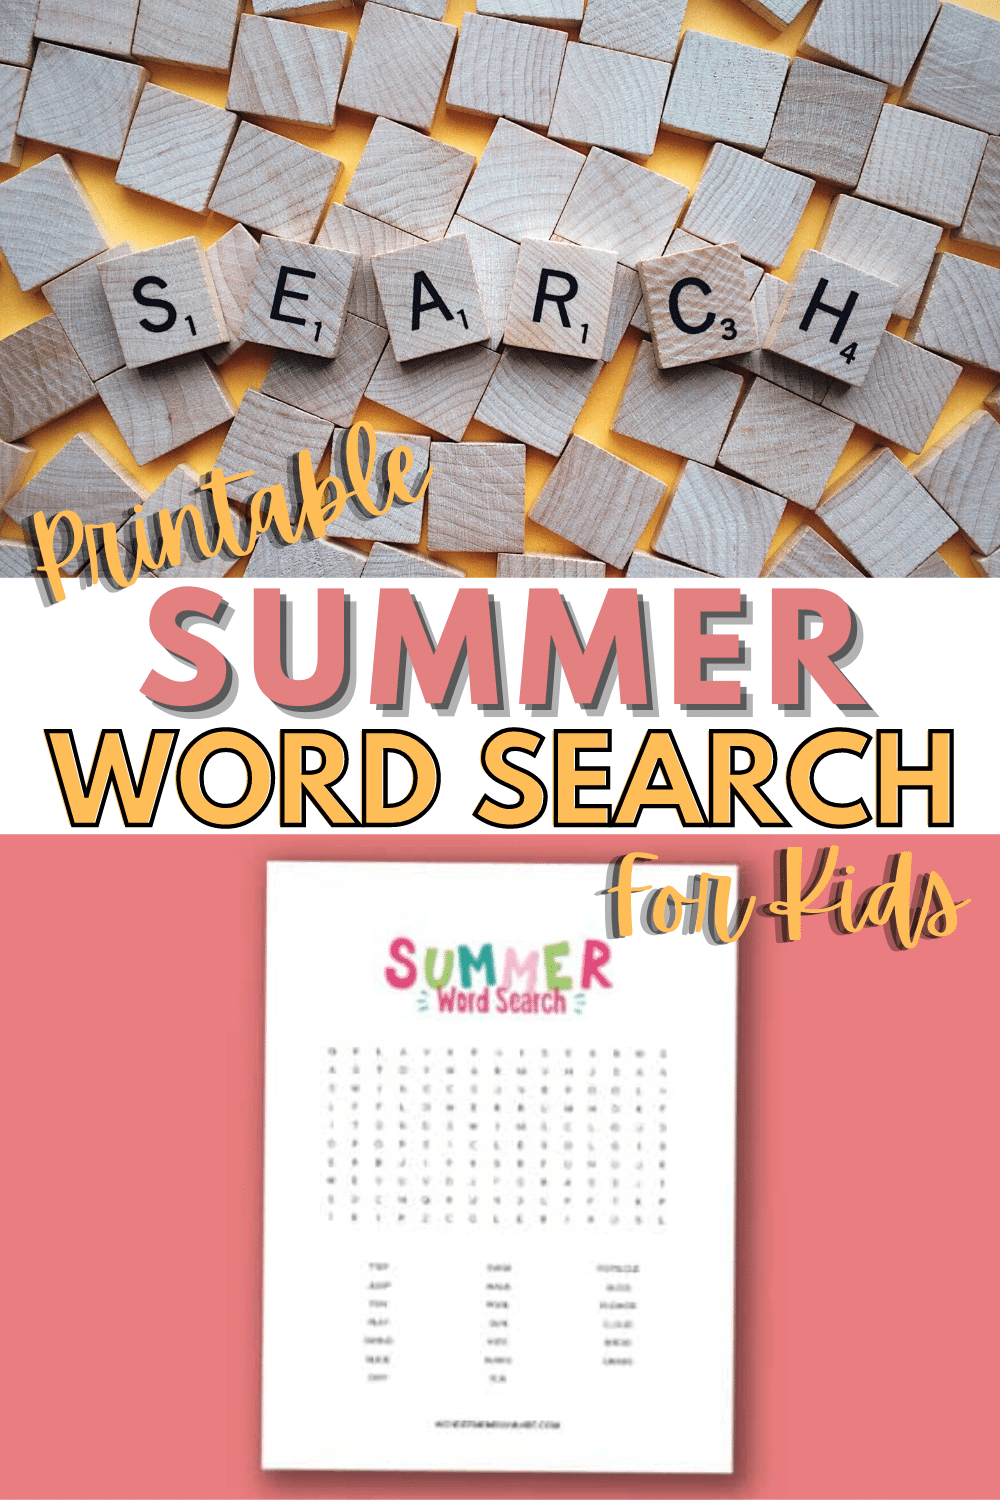 This printable summer word search for kids is summer-themed, fun and educational. A great activity for kids to keep them busy on a hot summer day. #wordsearch #printables #activitiesforkids #summer via @wondermomwannab